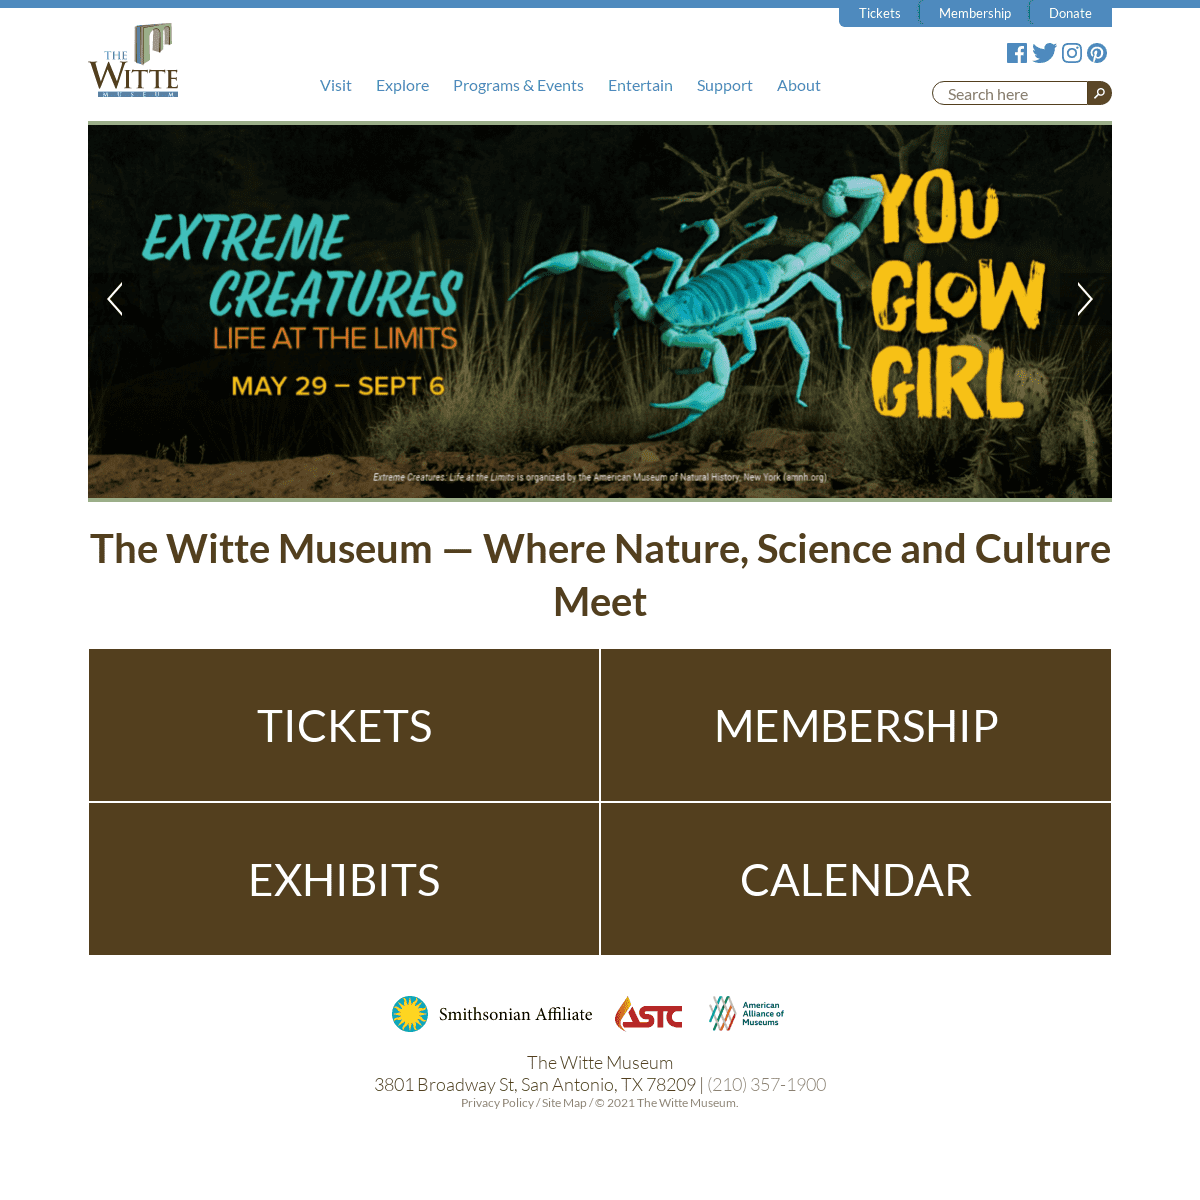 A complete backup of https://wittemuseum.org